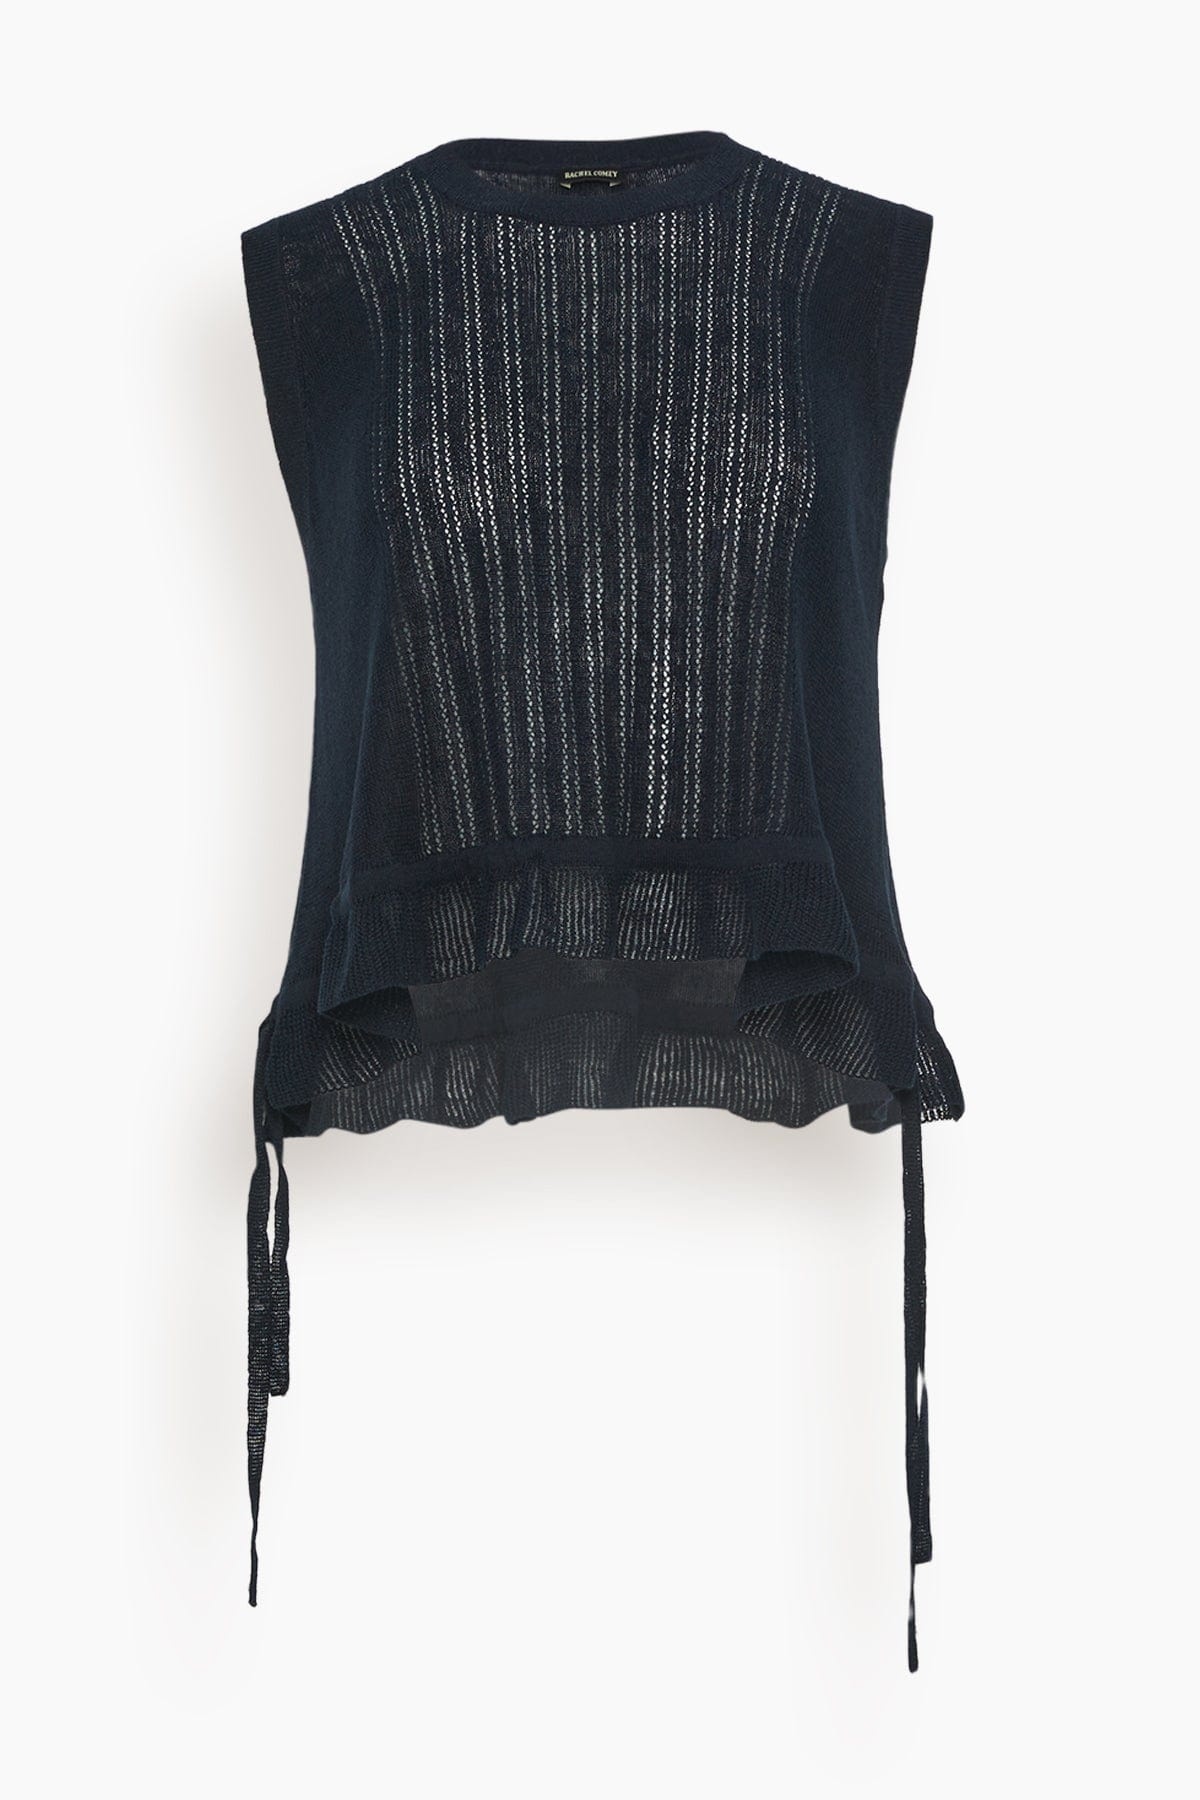 New Aires Top in Black - 1